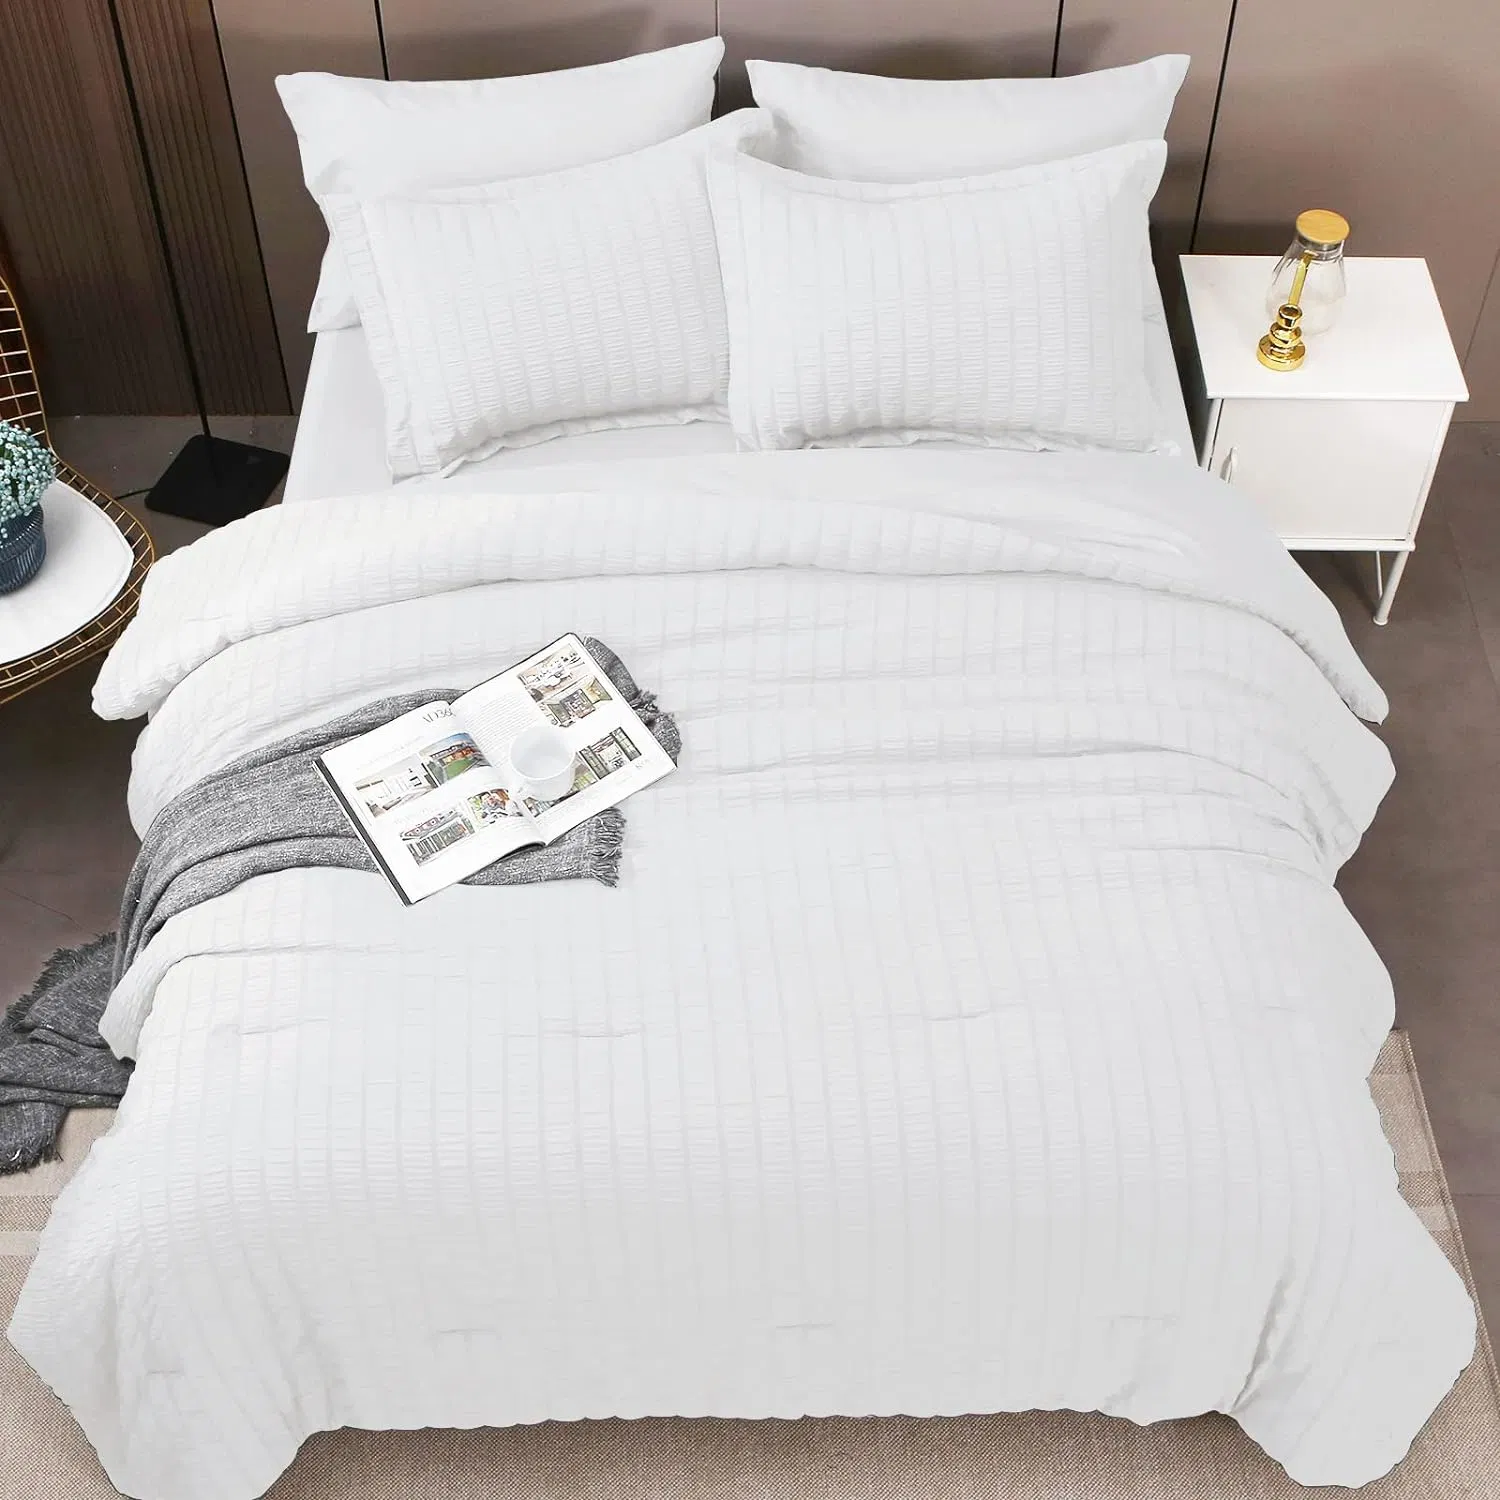 White Queen Comforter Set Seersucker 7 Pieces Bedding Set with Comforters, Sheets, Pillowcases & Shams Bed in a Bag for Bedroom